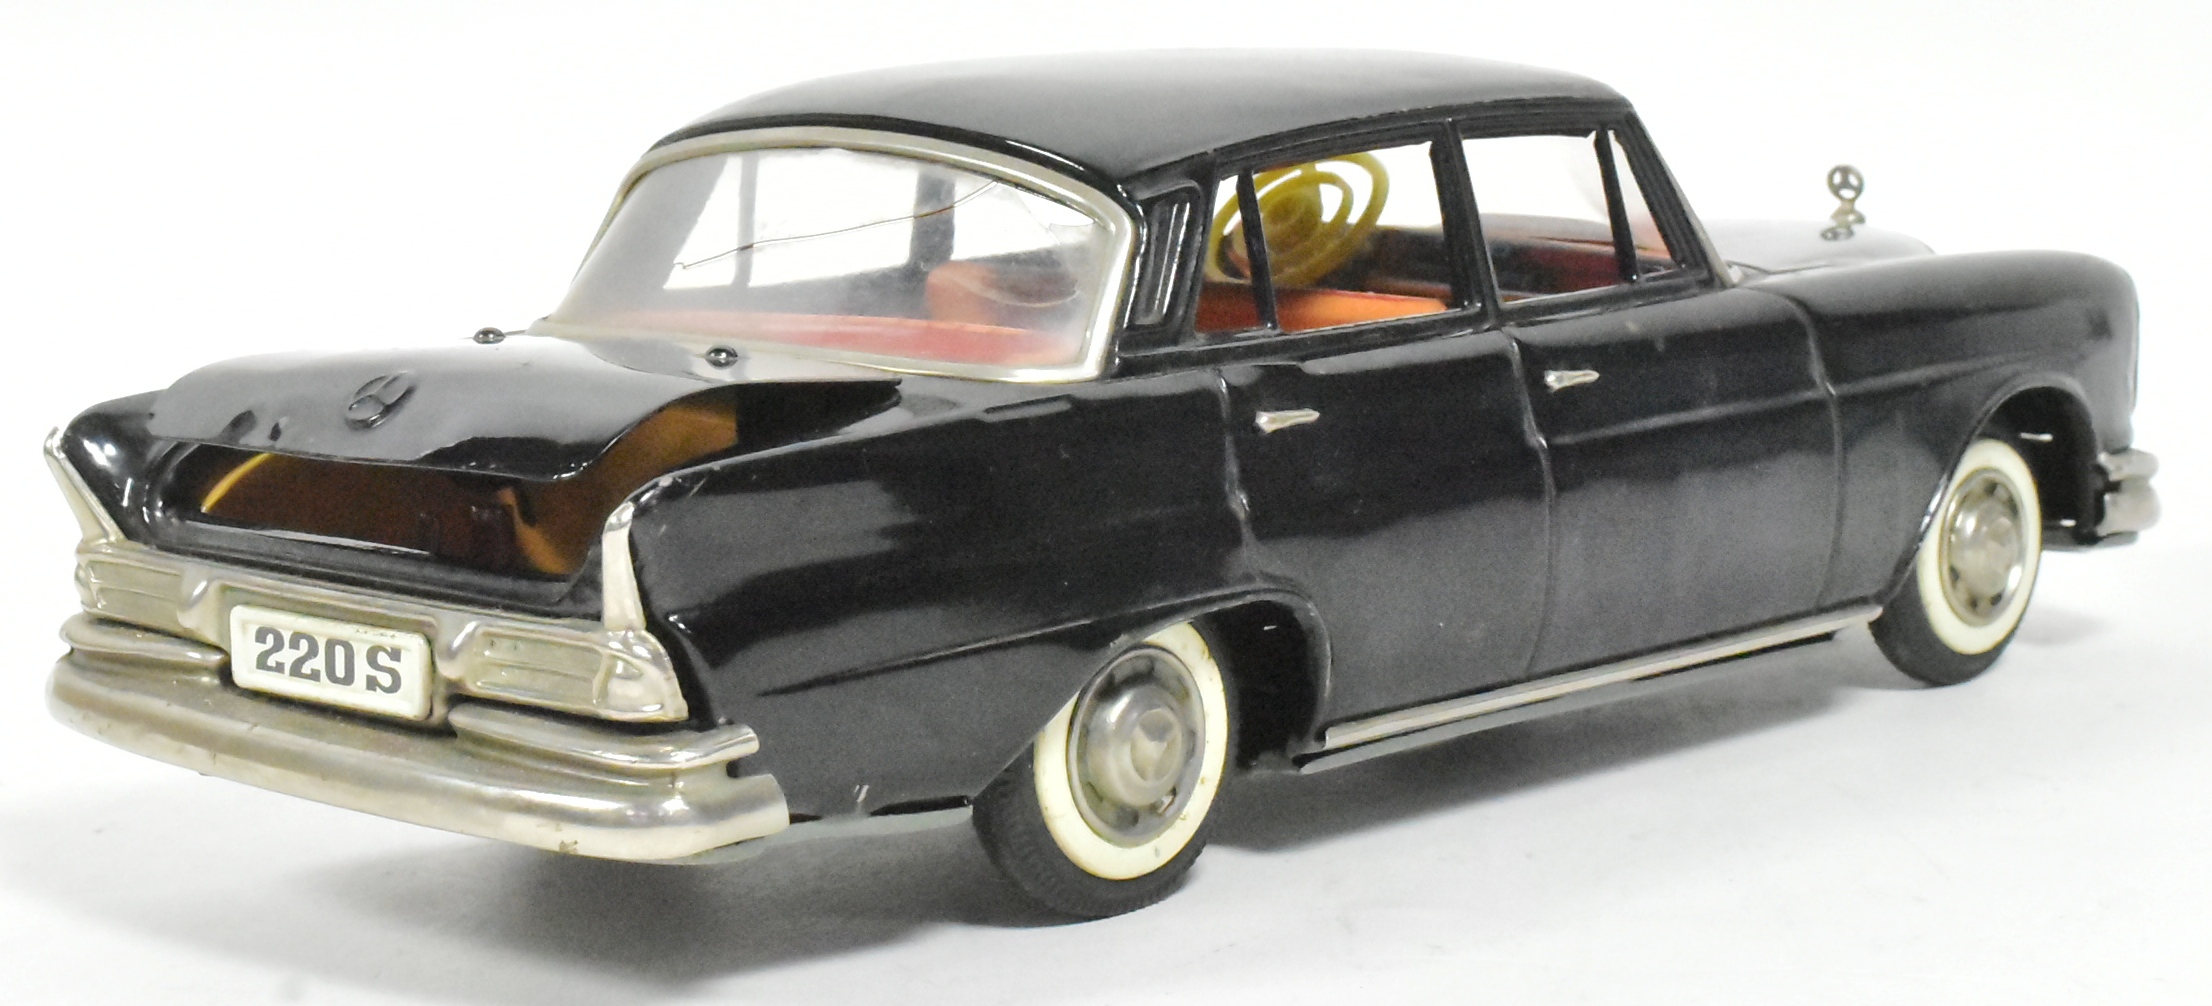 TINPLATE TOYS - JAPANESE TINPLATE MERCEDES BENZ 220S - Image 3 of 6